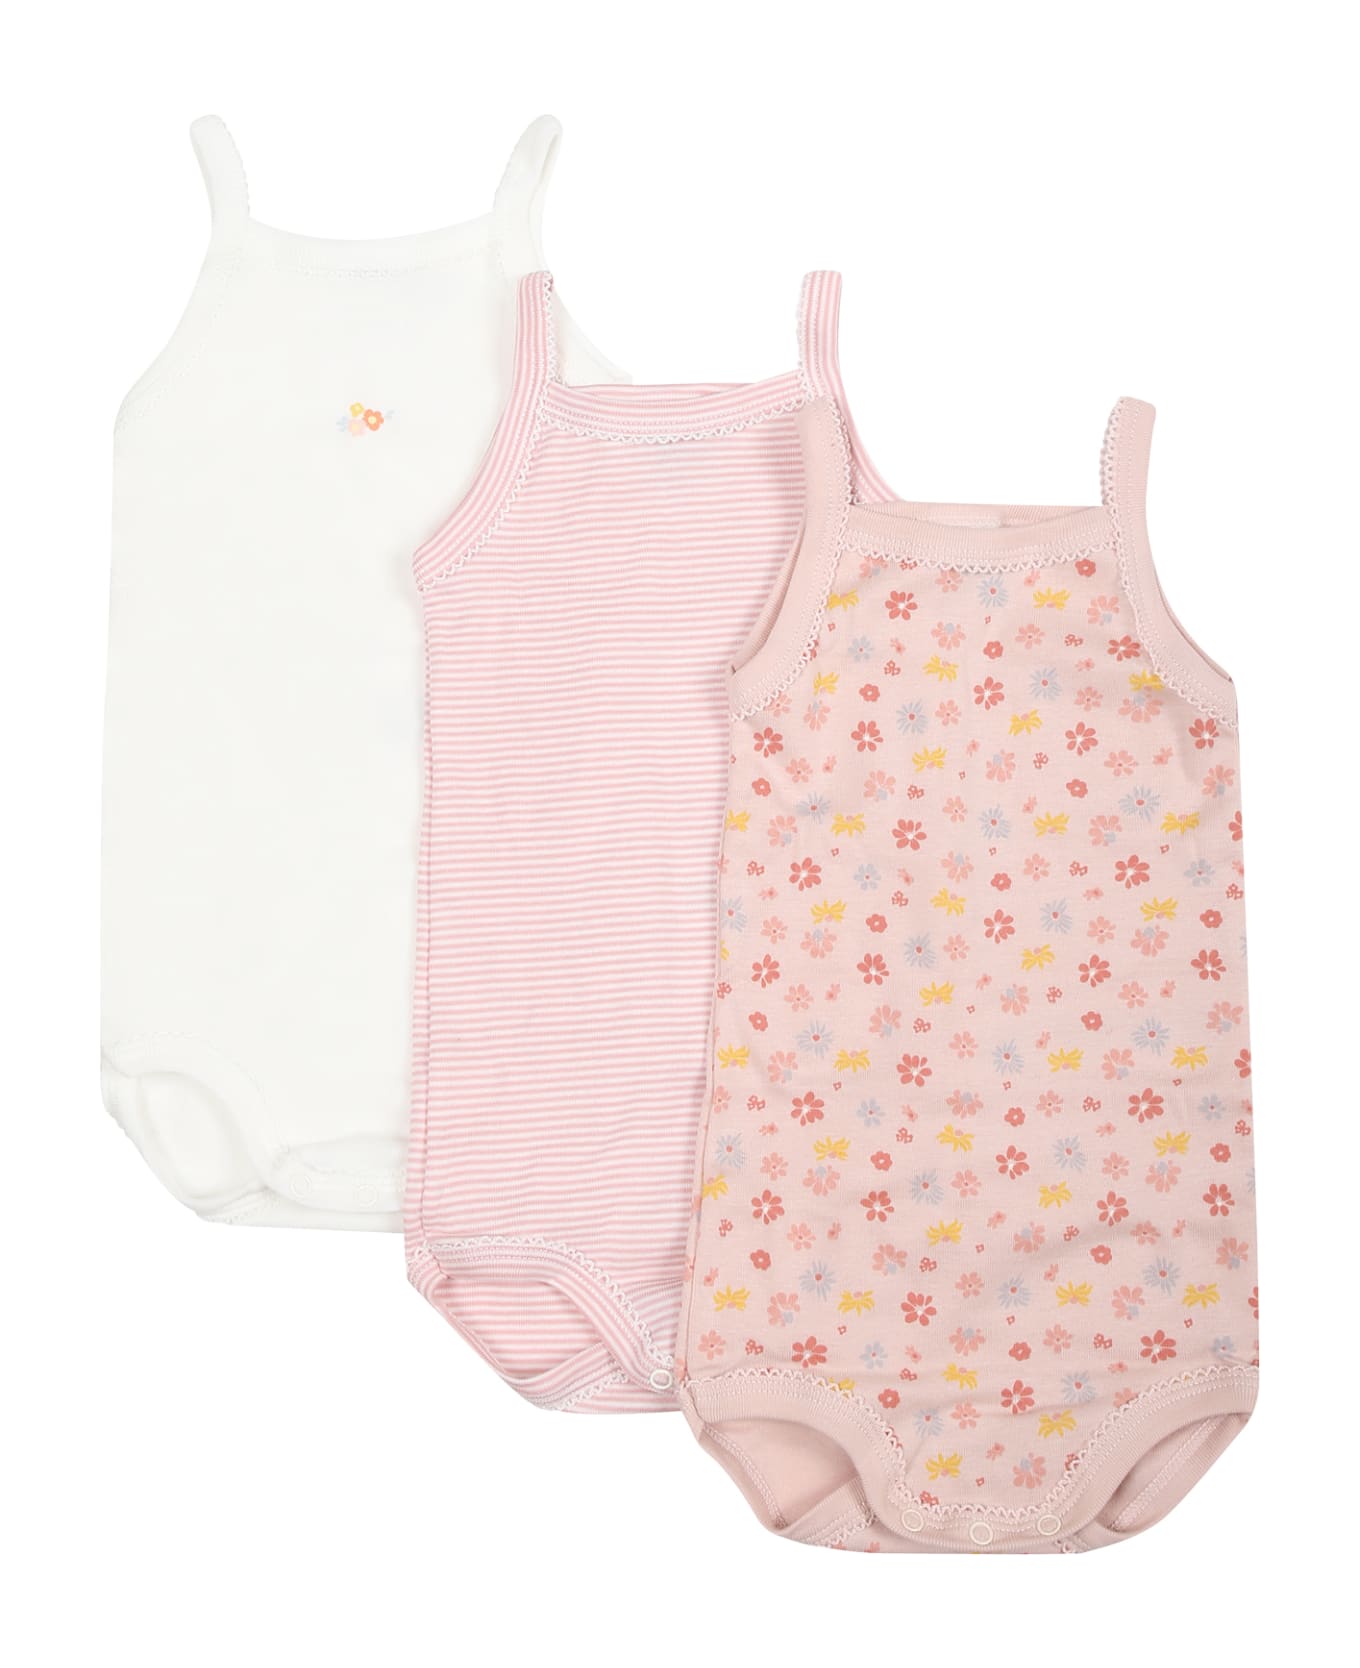 Petit Bateau Multicolor Set For Baby Girl With Flowers And Stripes - Multicolor